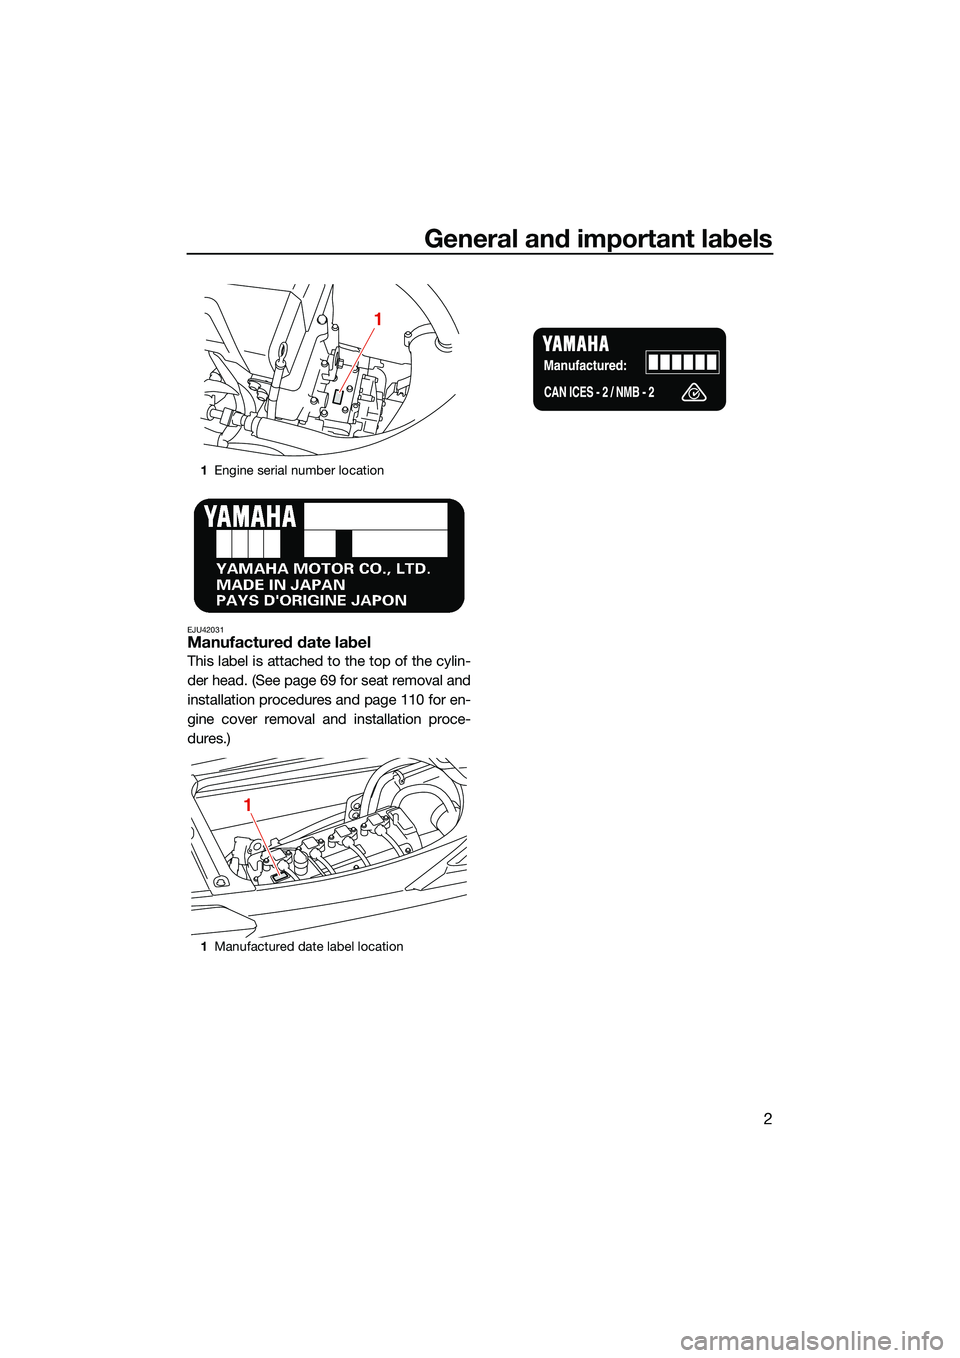 YAMAHA FX HO CRUISER 2022 User Guide General and important labels
2
EJU42031Manufactured date label
This label is attached to the top of the cylin-
der head. (See page 69 for seat removal and
installation procedures and page 110 for en-
